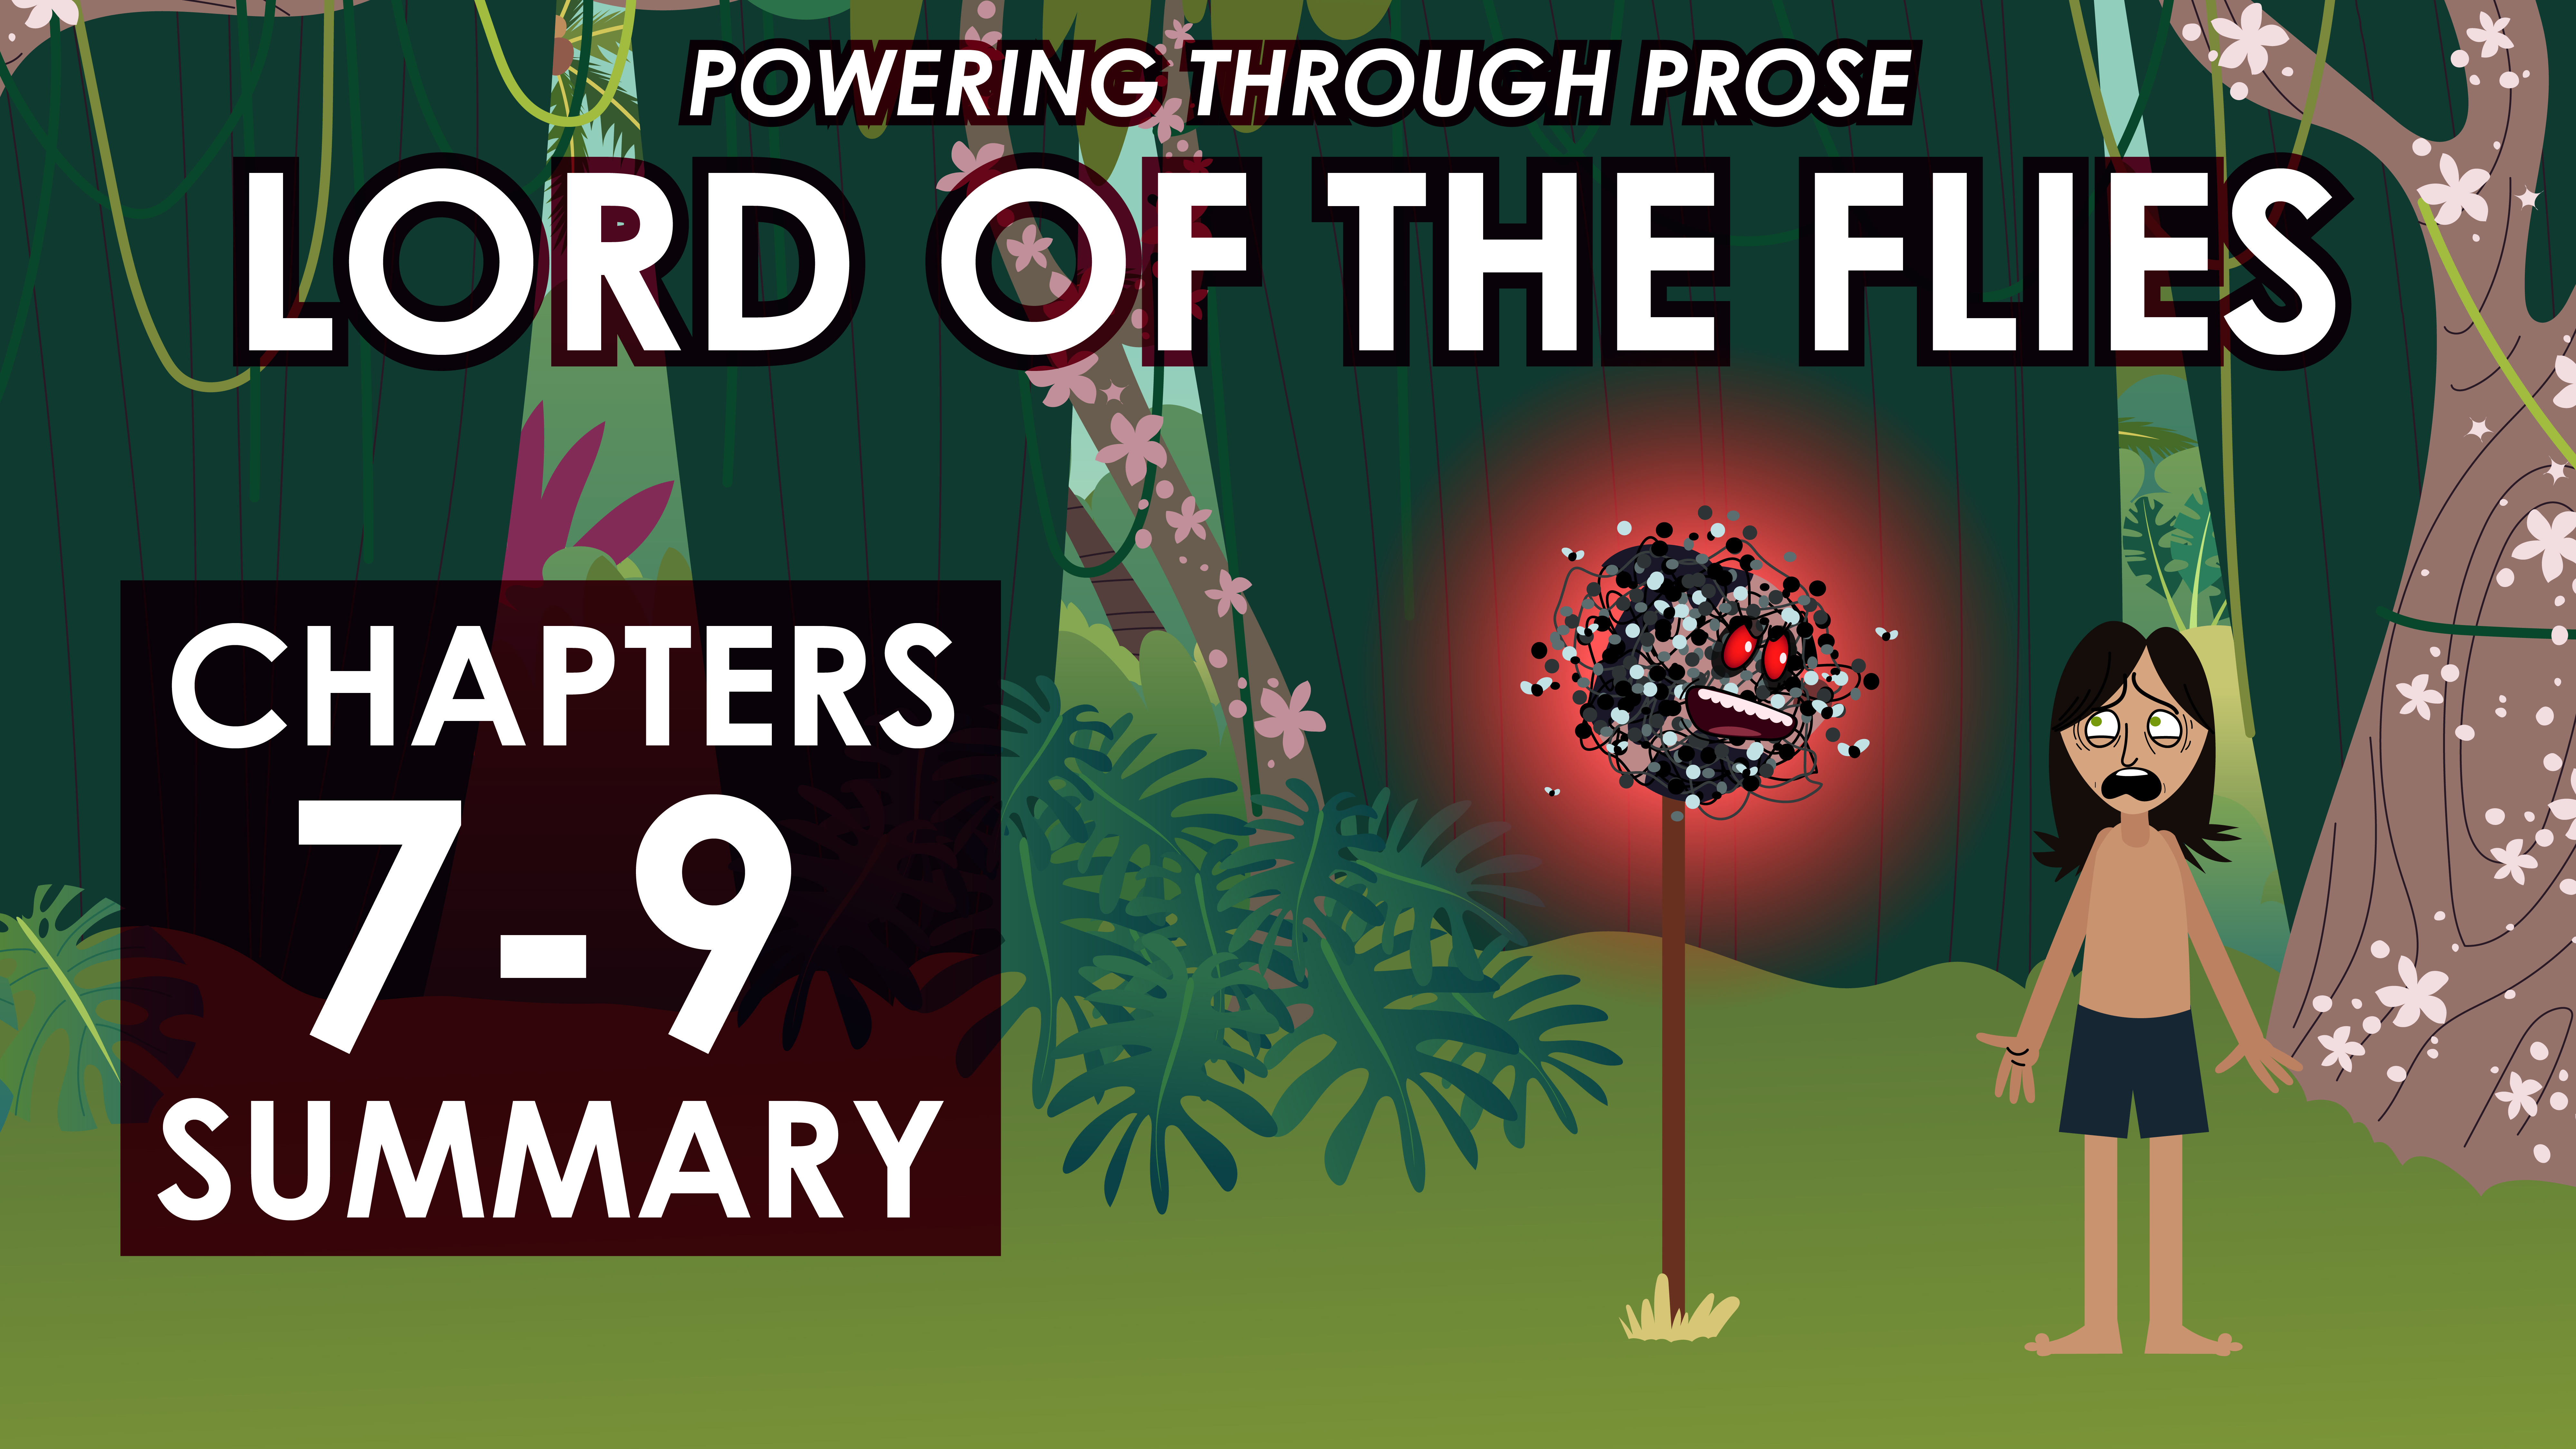 Lord of the Flies - William Golding - Chapters 7-9 Summary - Powering Through Prose Series